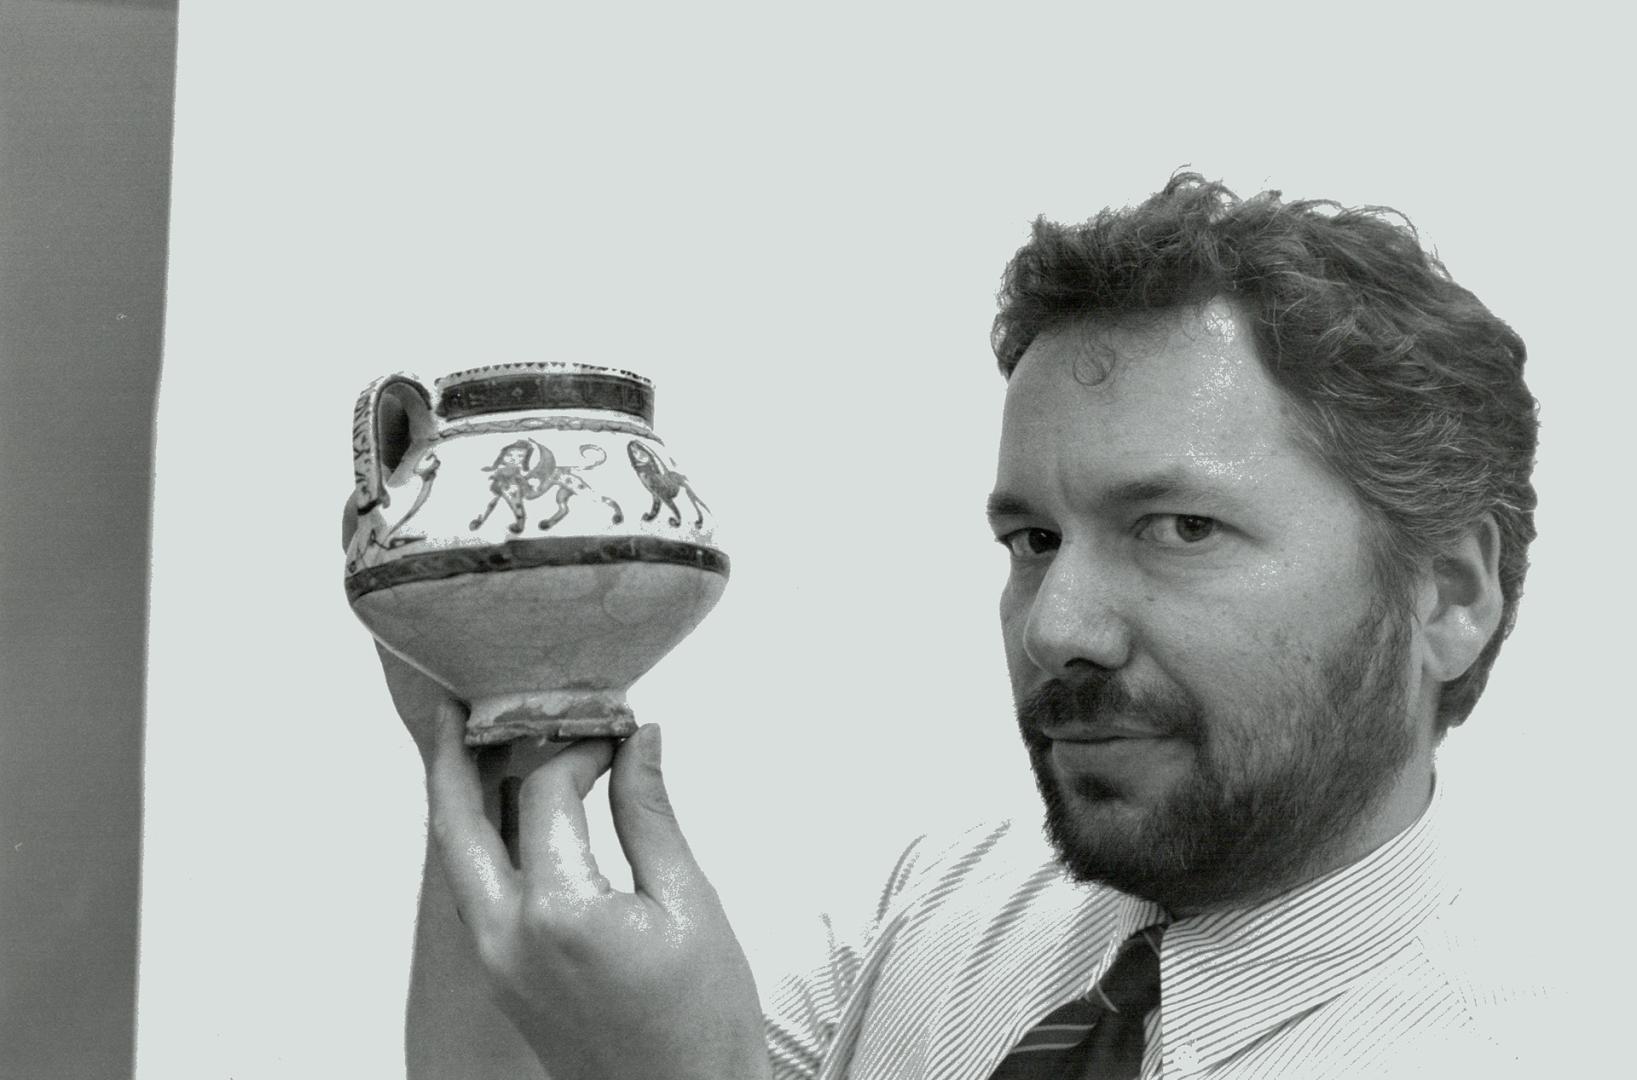 Robert Mason 12th - century pot fered at a Kila in what is now Iran